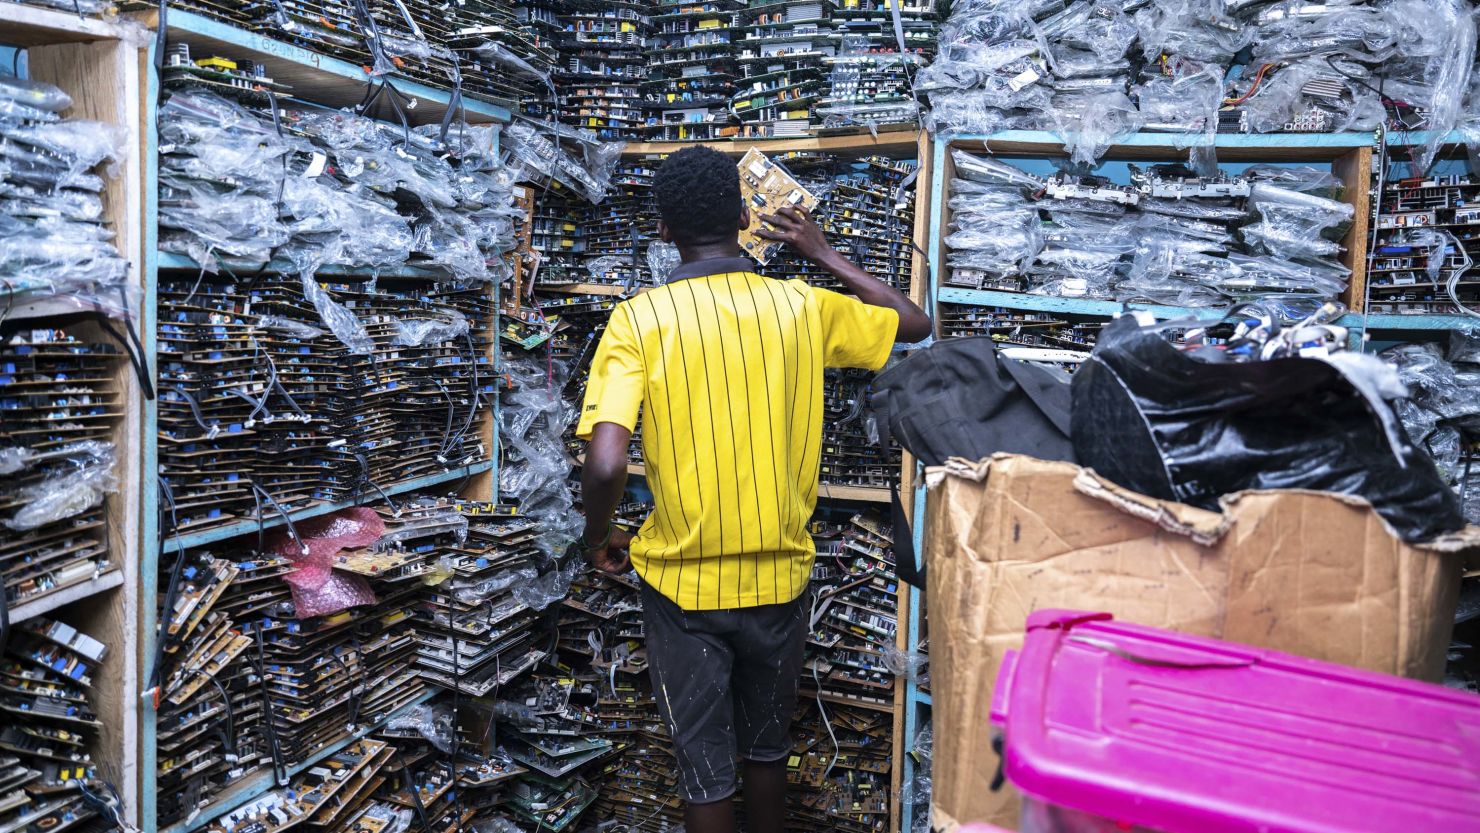 One of the hundreds of small shops for electronics in the narrow streets of an Accra neighborhood in Ghana. Here, broken electronics get dismantled and reused.